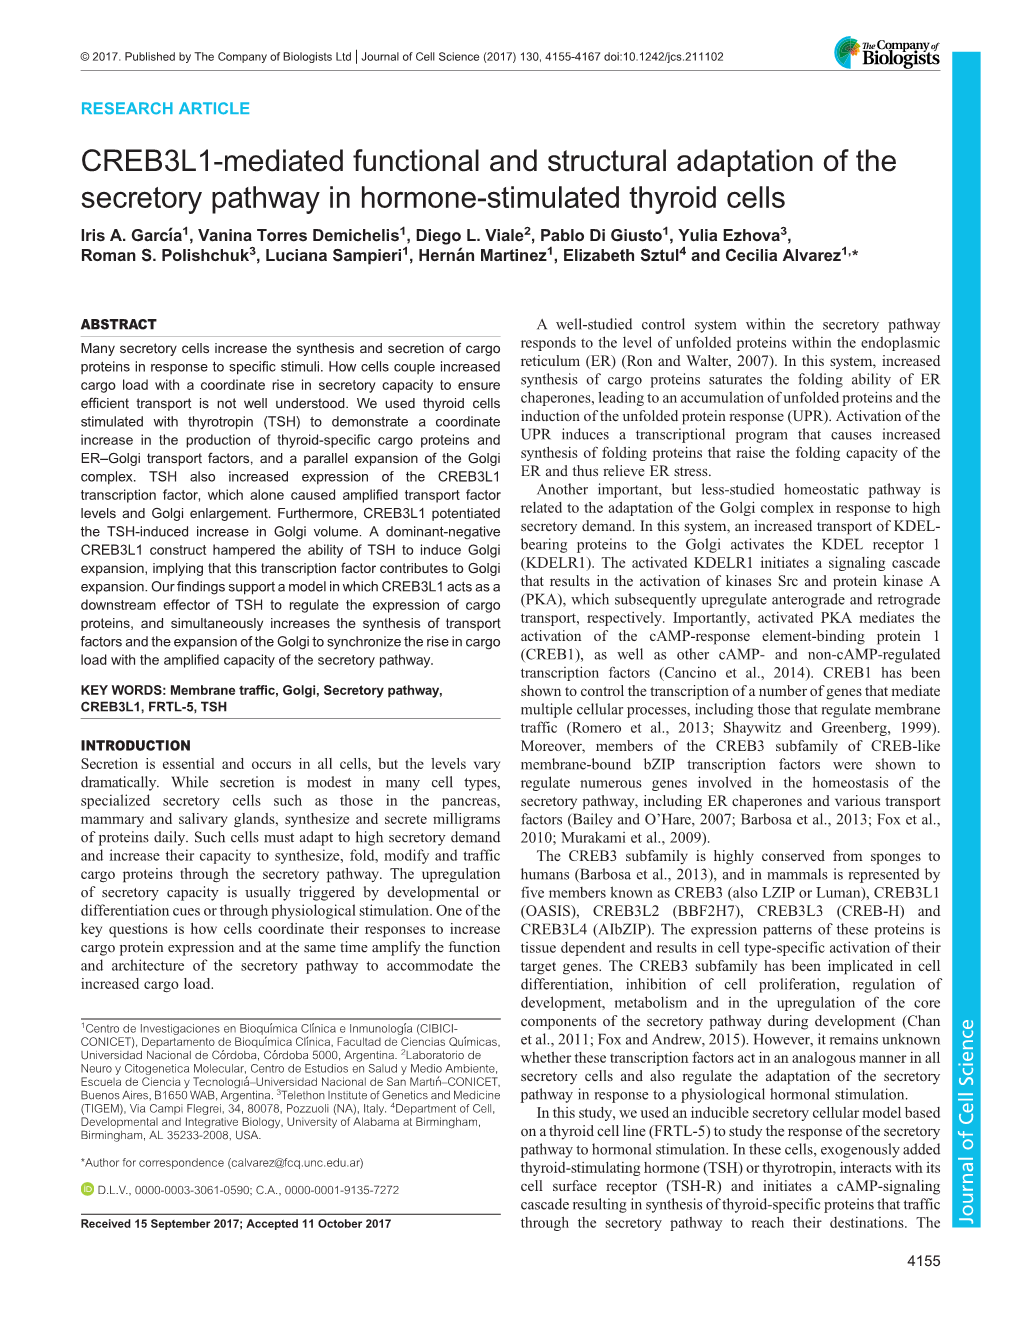 CREB3L1-Mediated Functional and Structural Adaptation of the Secretory Pathway in Hormone-Stimulated Thyroid Cells Iris A